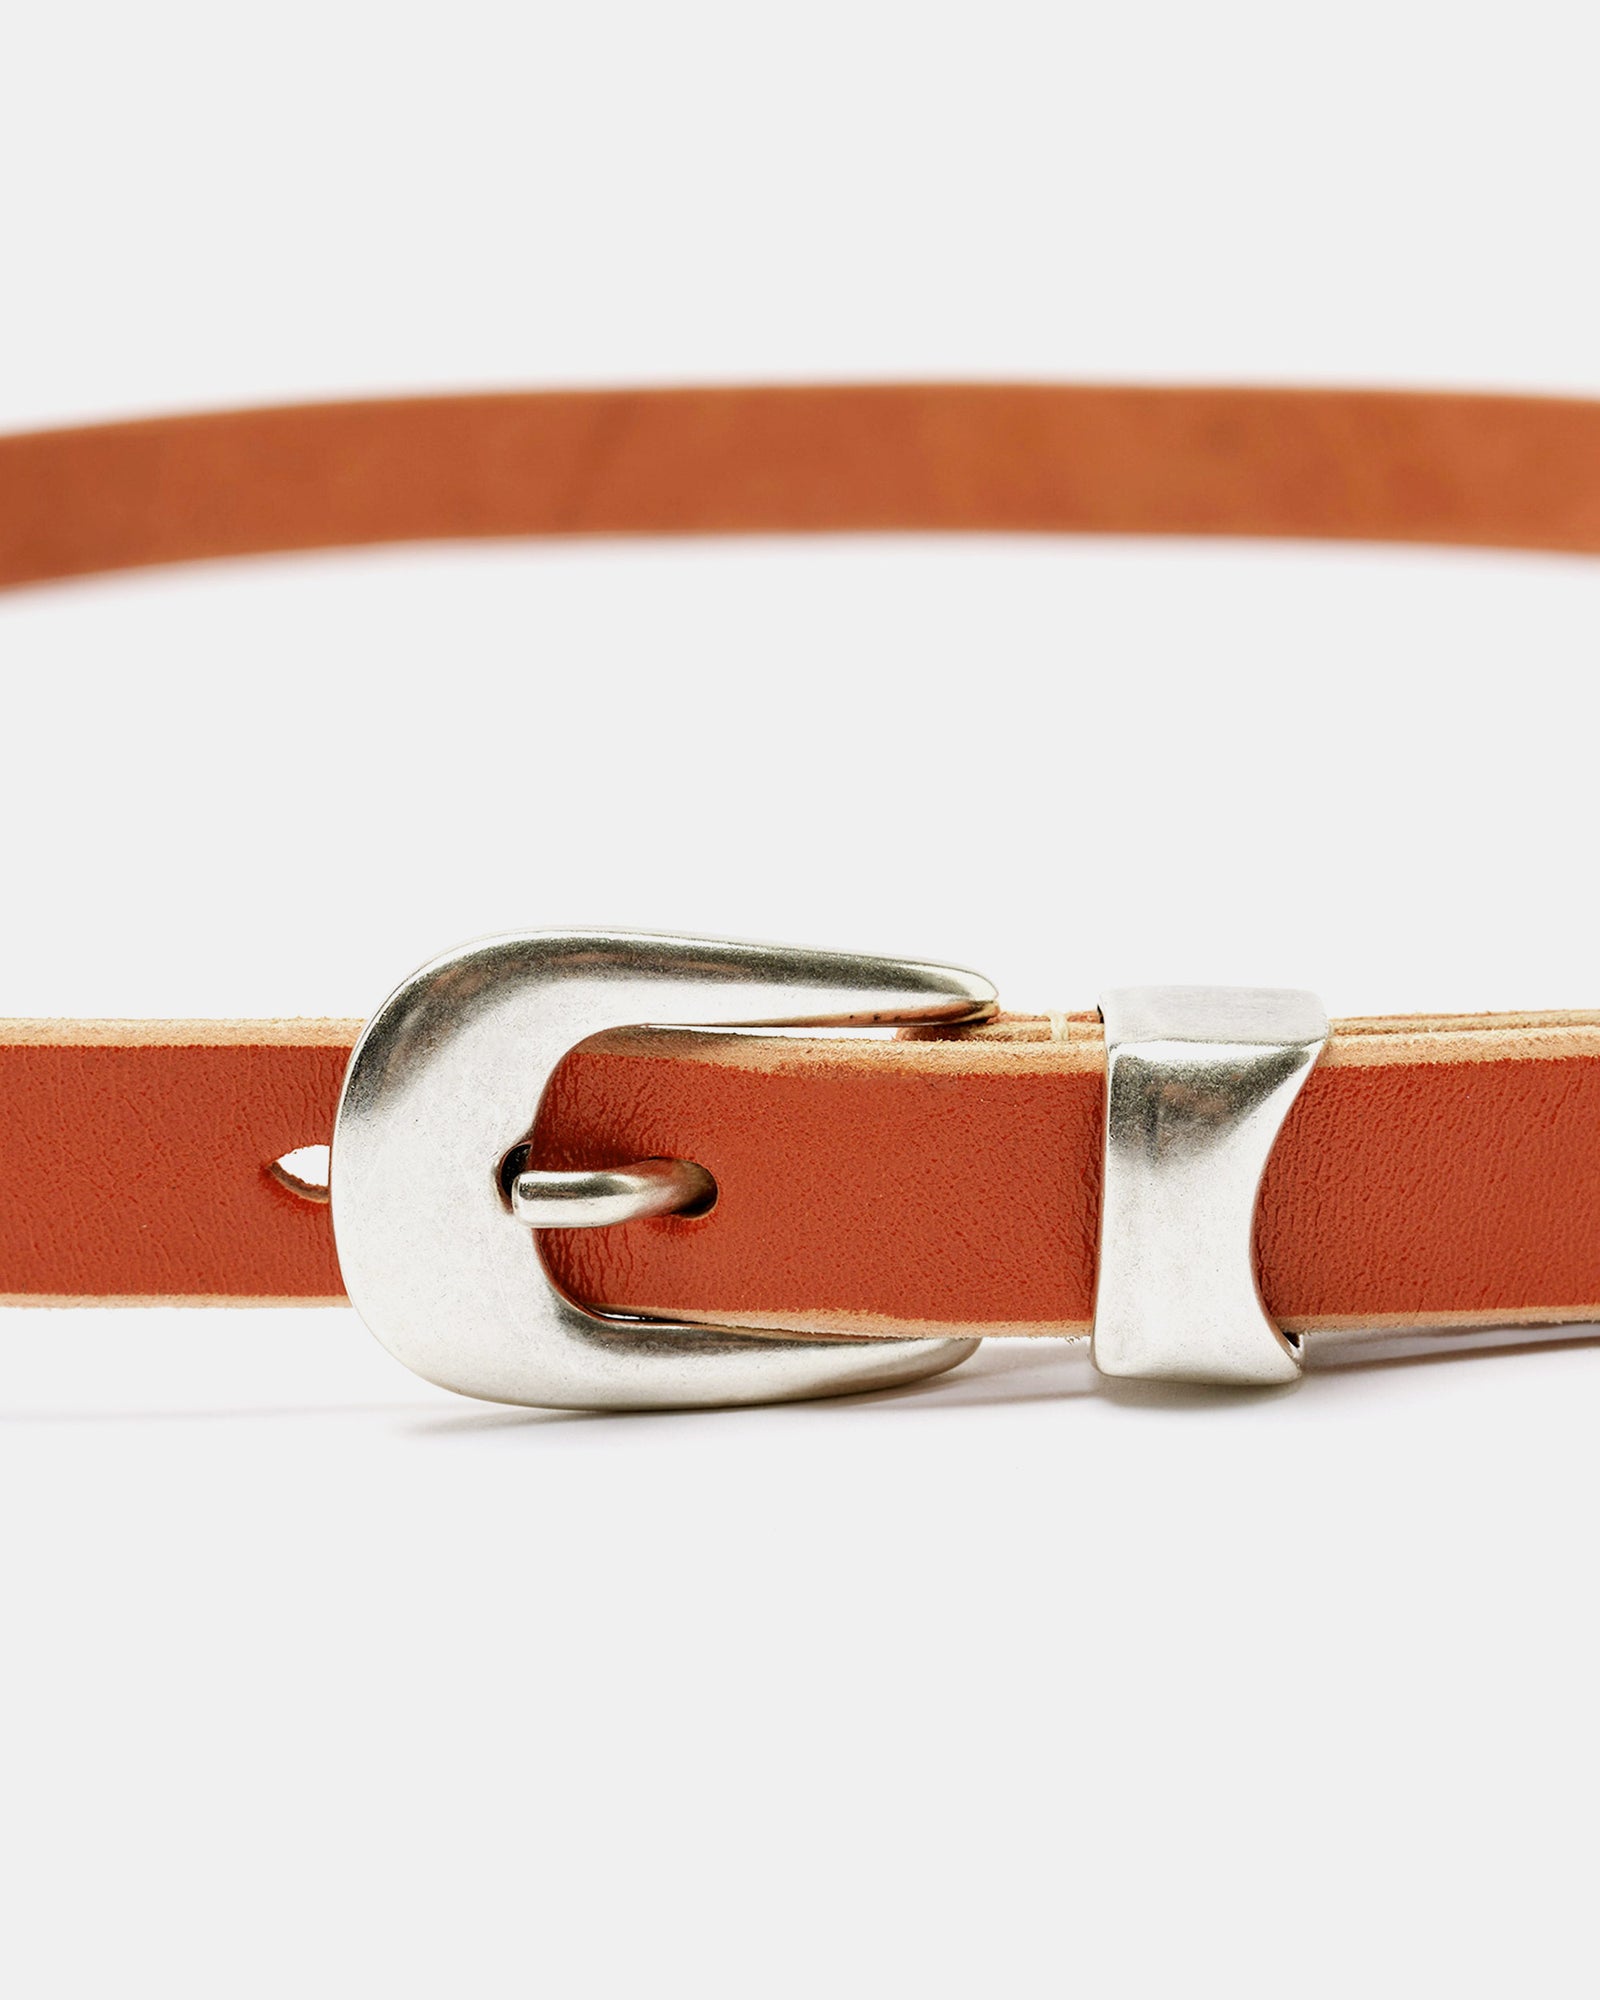 Our Legacy 2cm Belt in Arancia Orange Leather A22118CO CONTRA Store